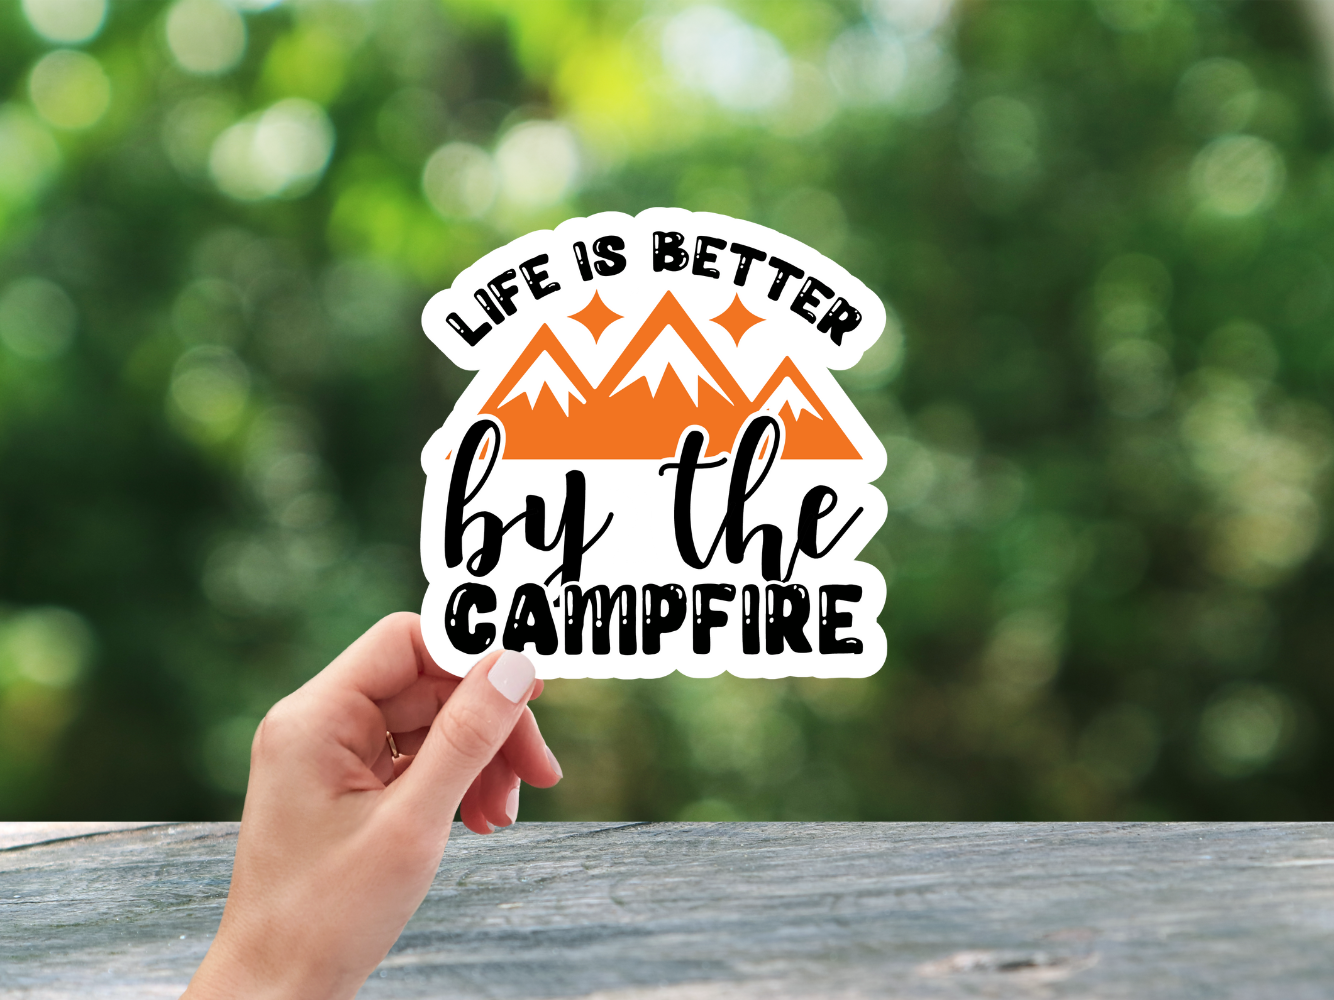 Life Is Better By The Campfire Sticker